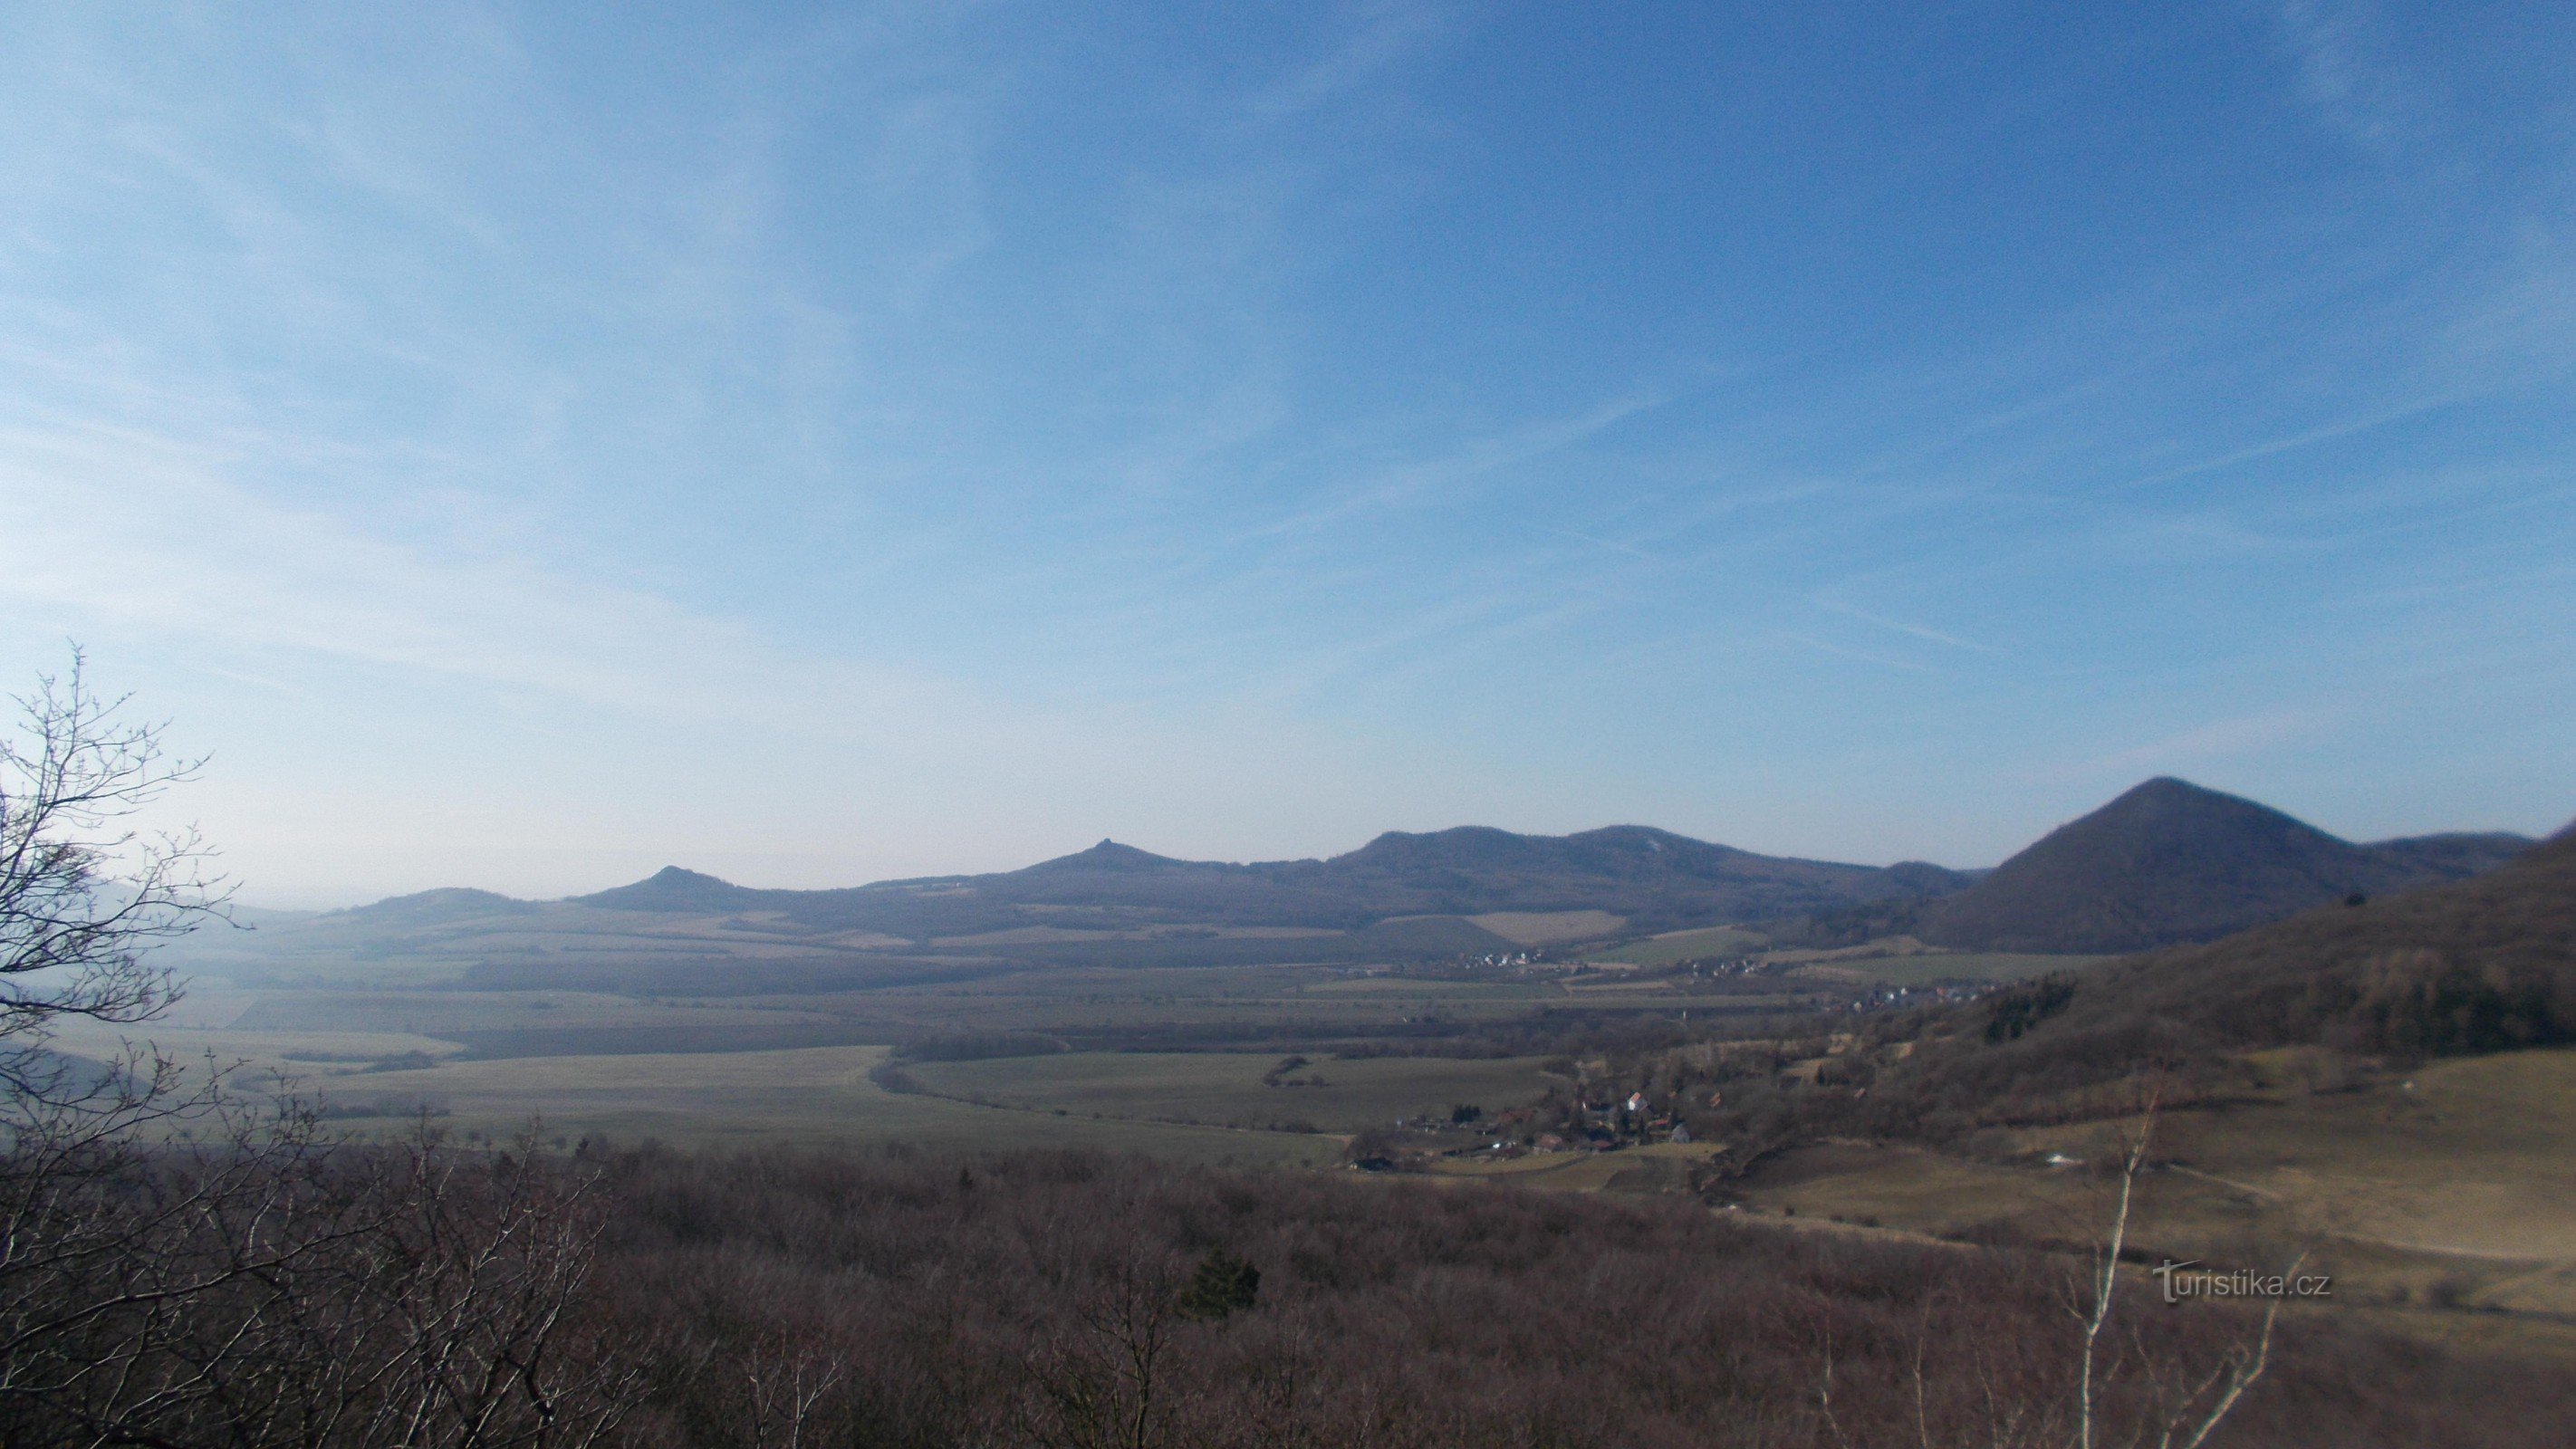 The southwestern part of the Bohemian Central Mountains as seen from Ostrý.